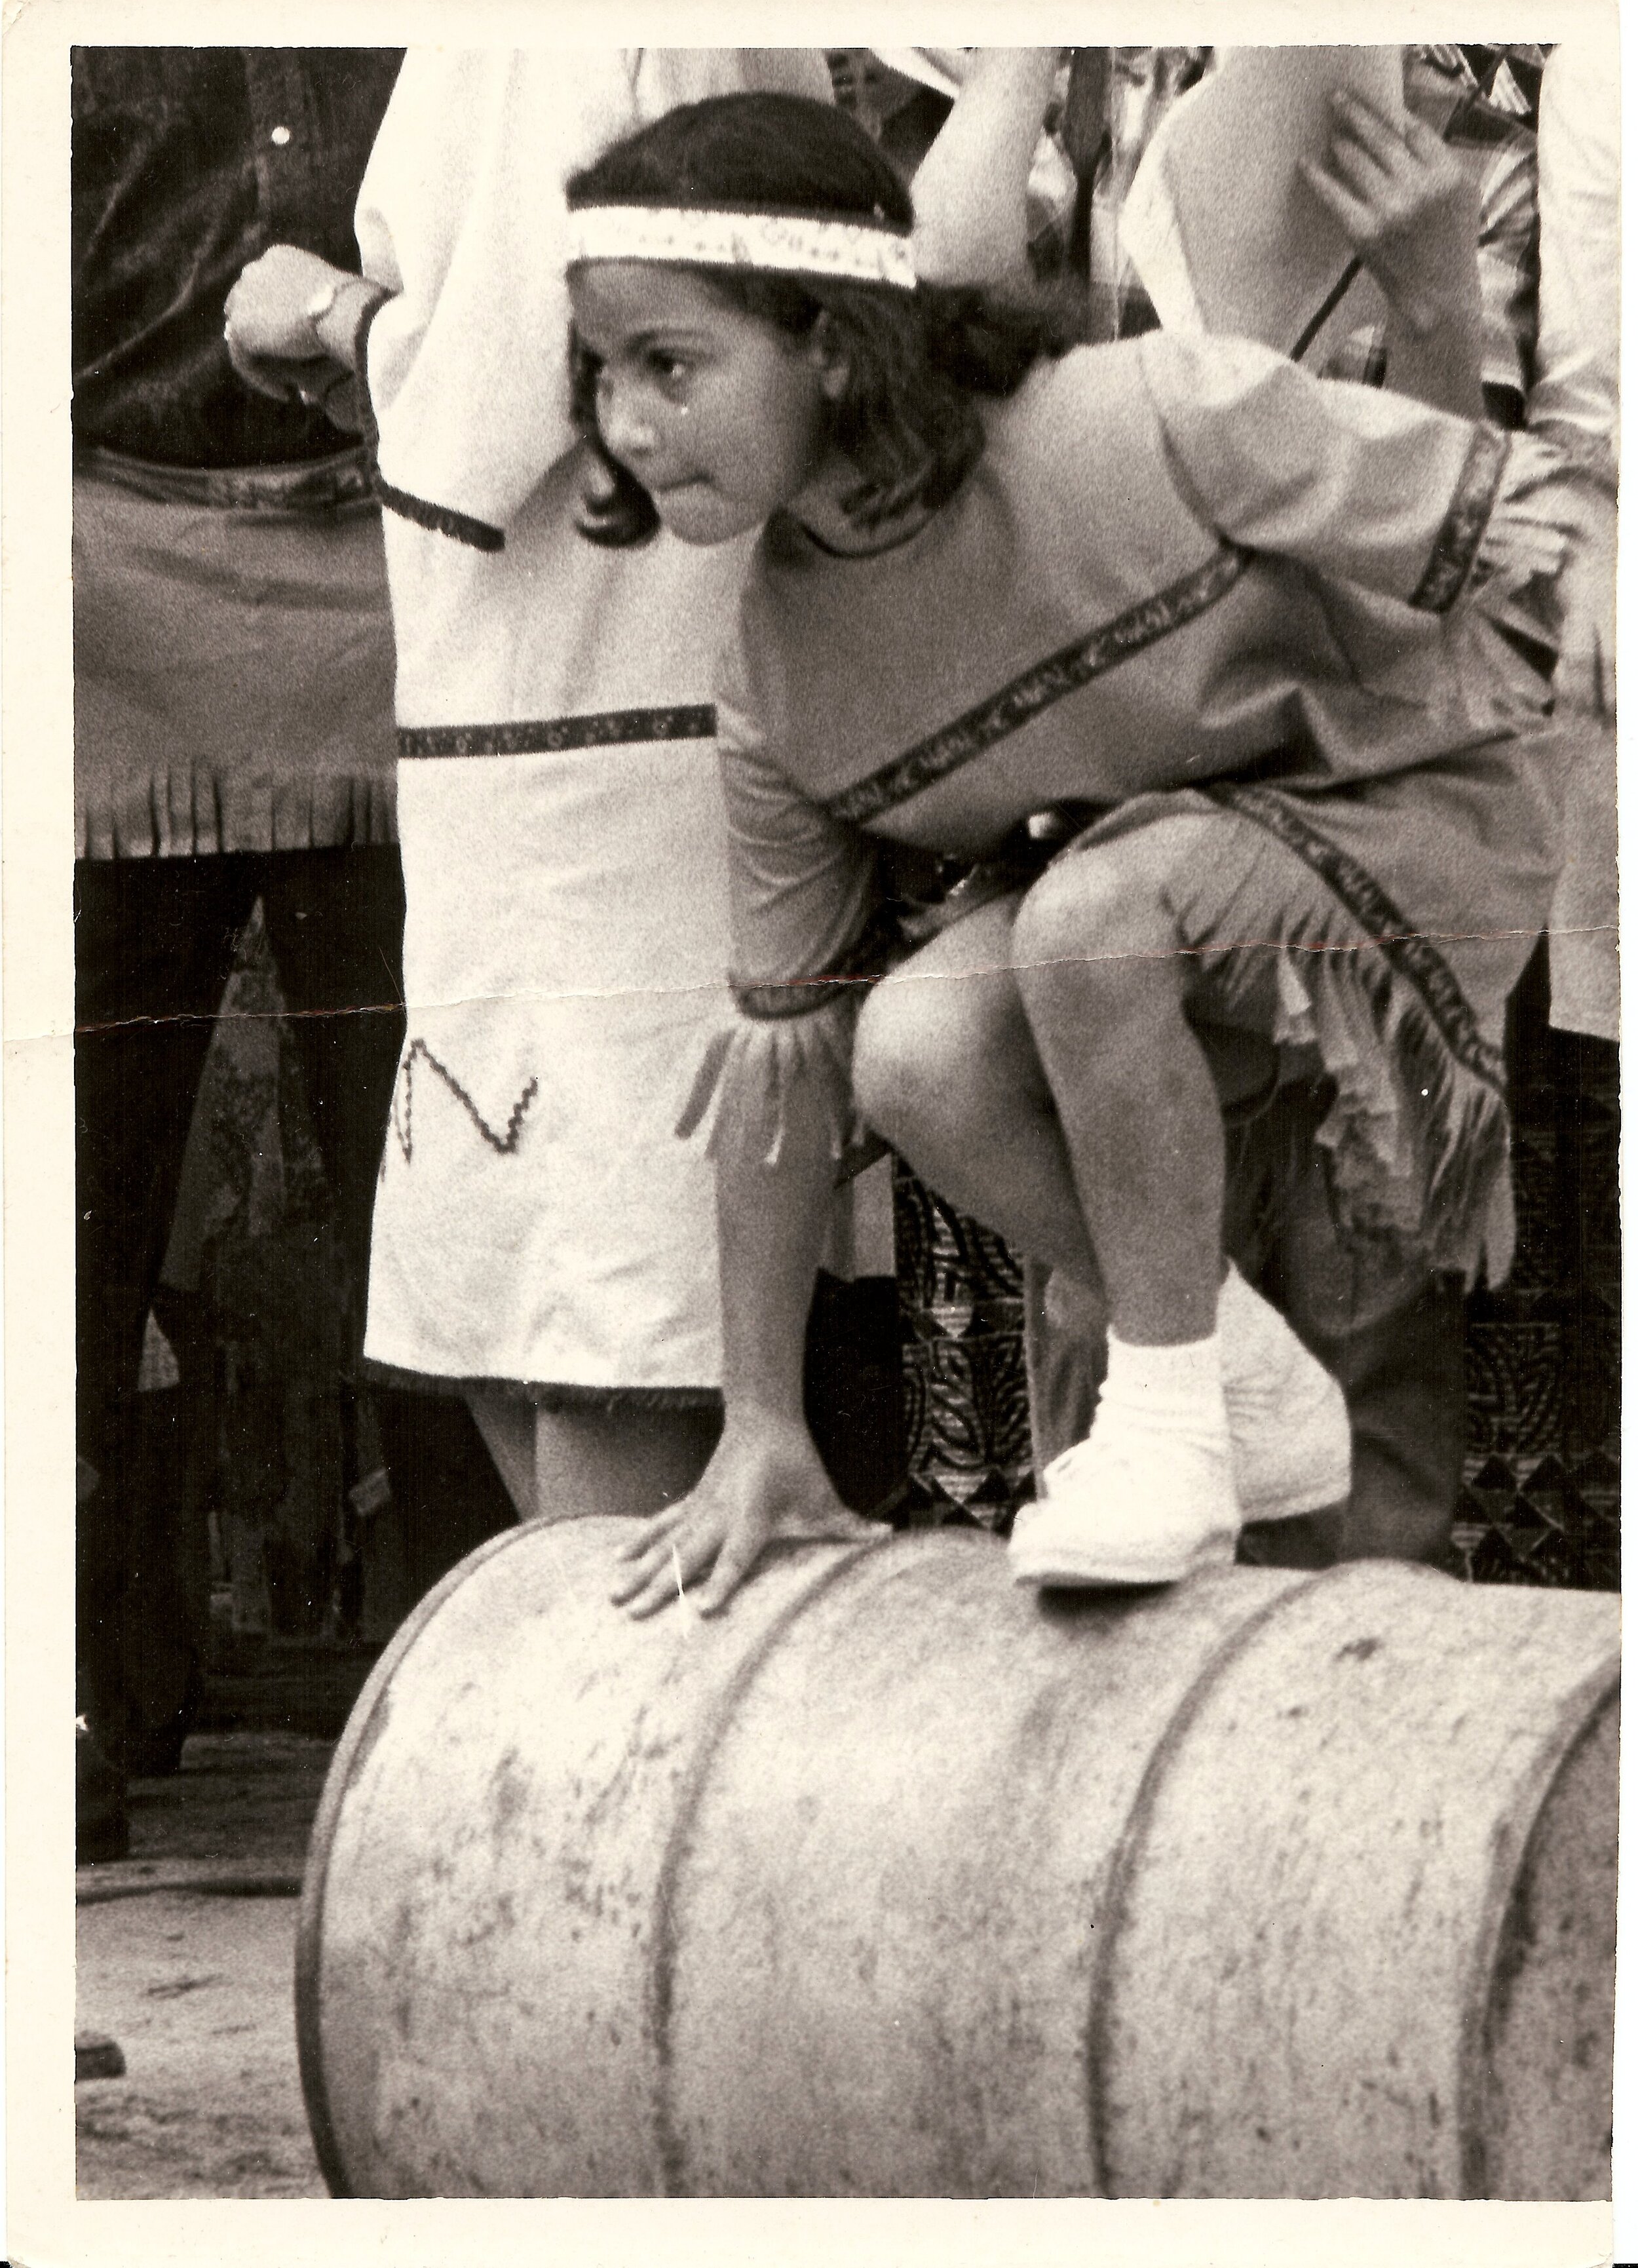  Historical images are synthesized in the composition to tell the story of the Haliwa-Saponi People. Here Wanda Richardson is walking the barrel c. 1966.  Photo courtesy of the Haliwa-Saponi Tribe  